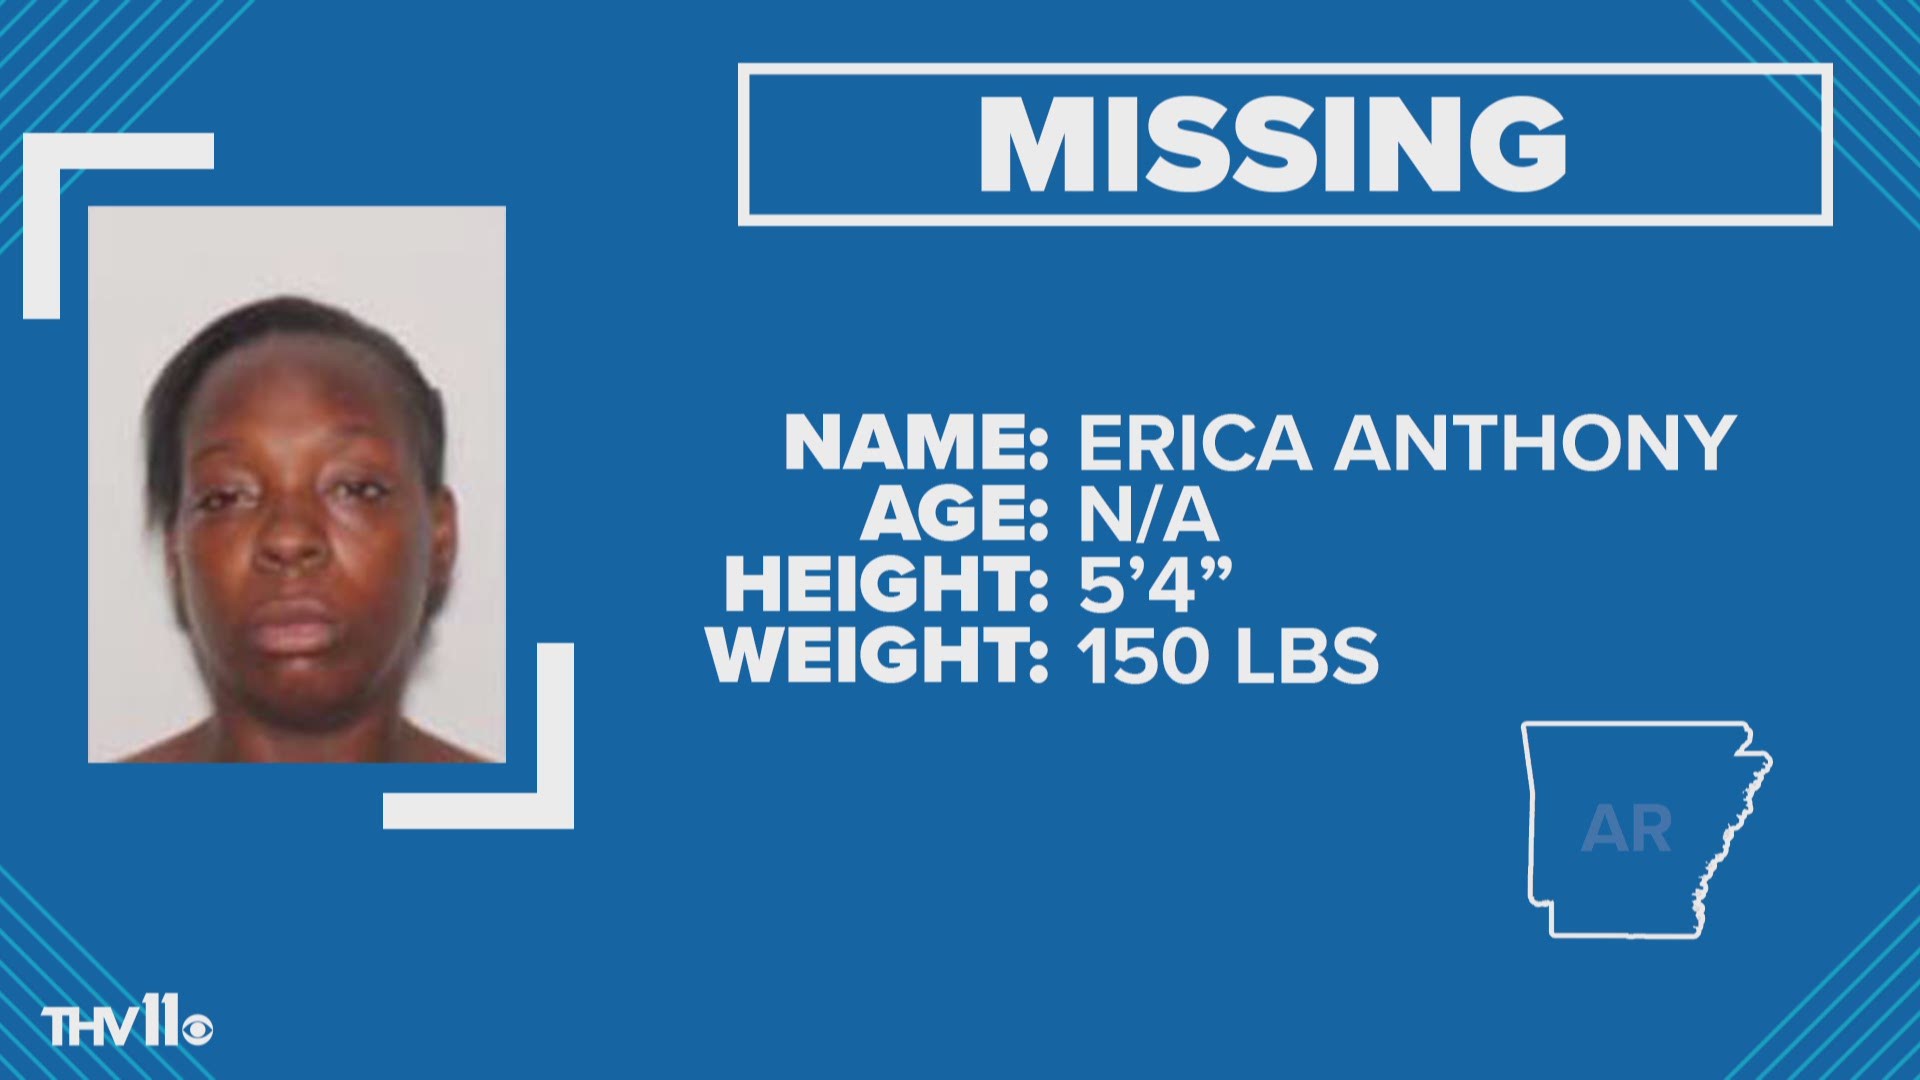 According to the LRPD, Erica Anthony was last seen leaving 800 Broadway Street.